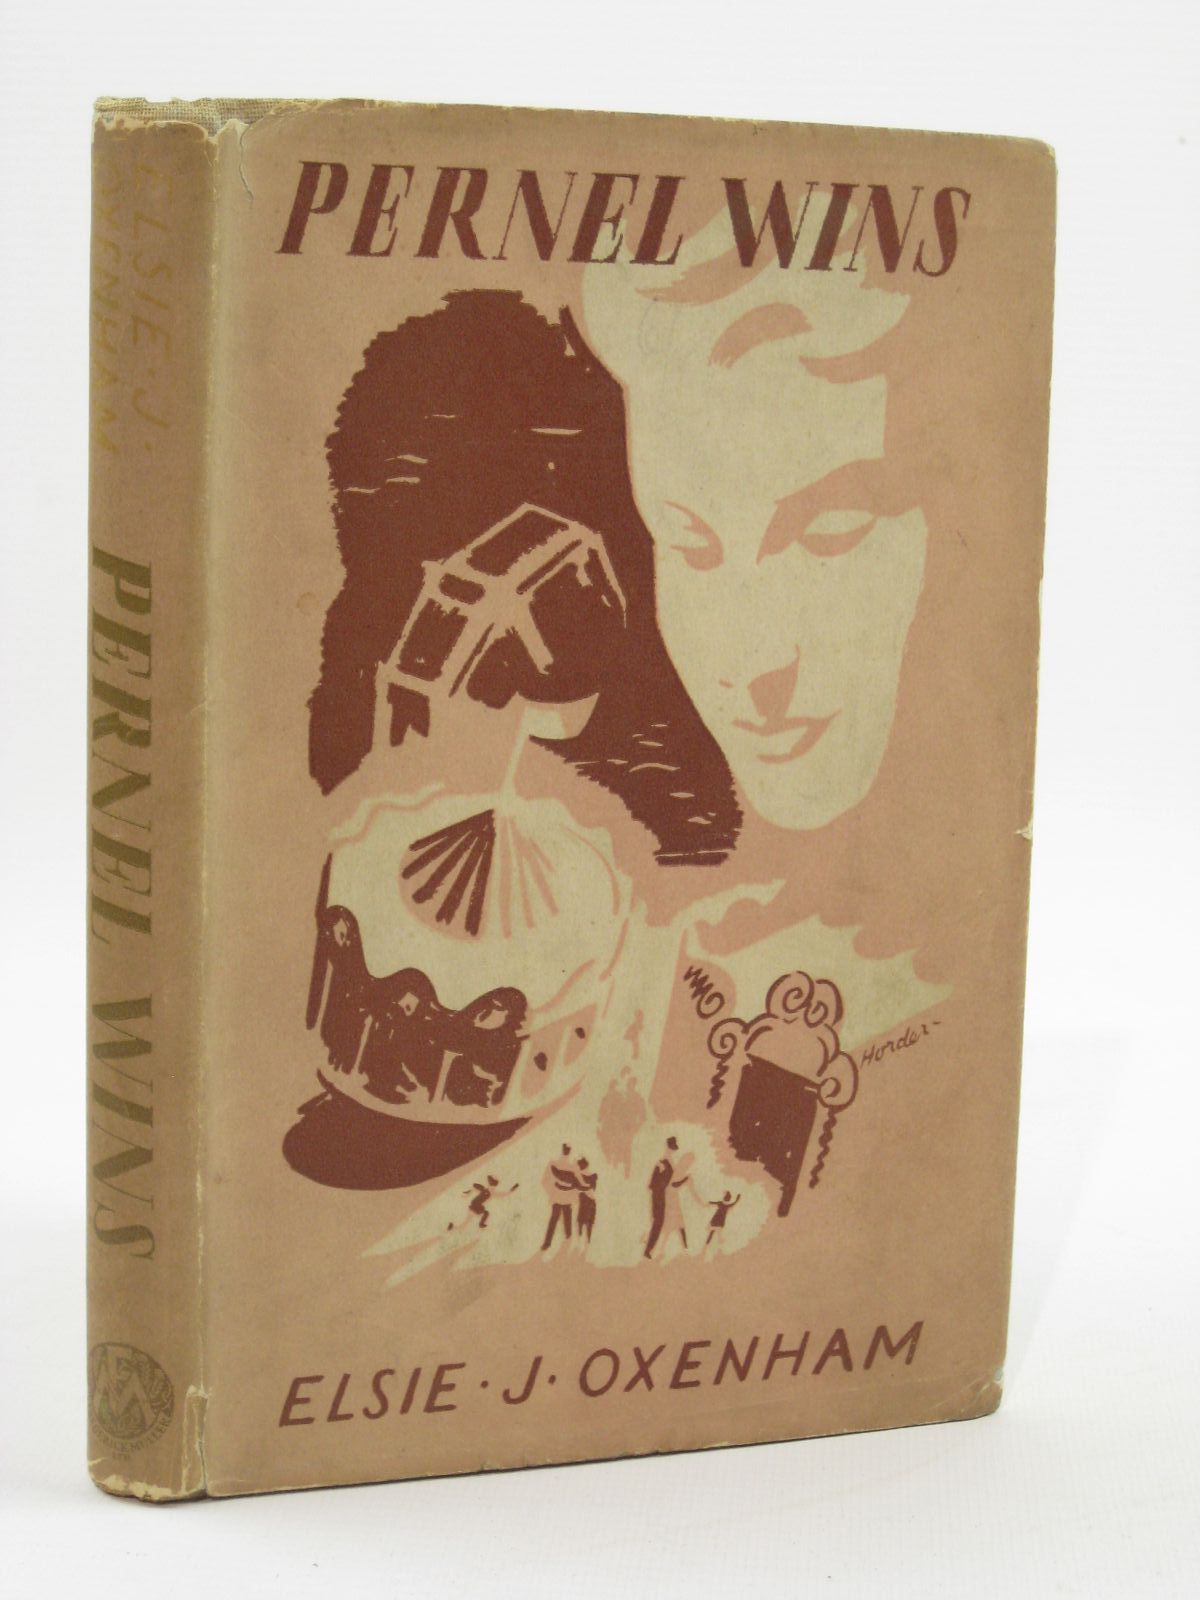 Cover of PERNEL WINS by Elsie J. Oxenham